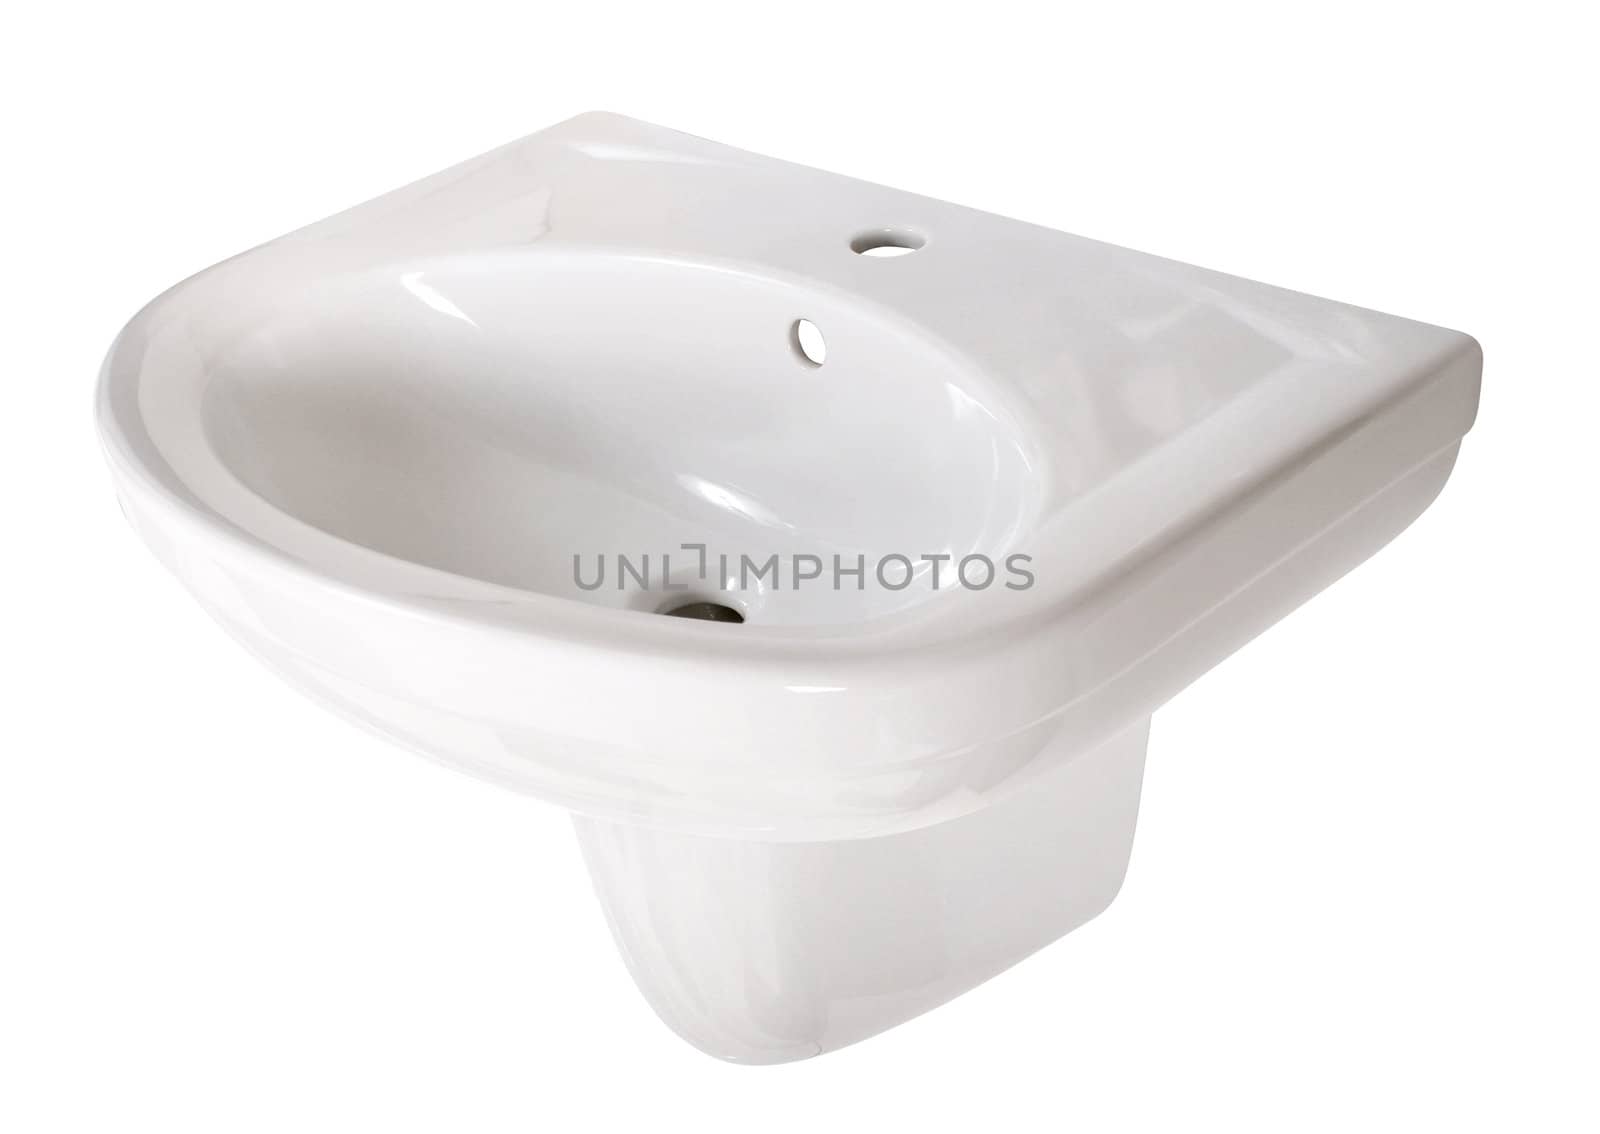 Washbasin. File includes clipping path by igor_stramyk